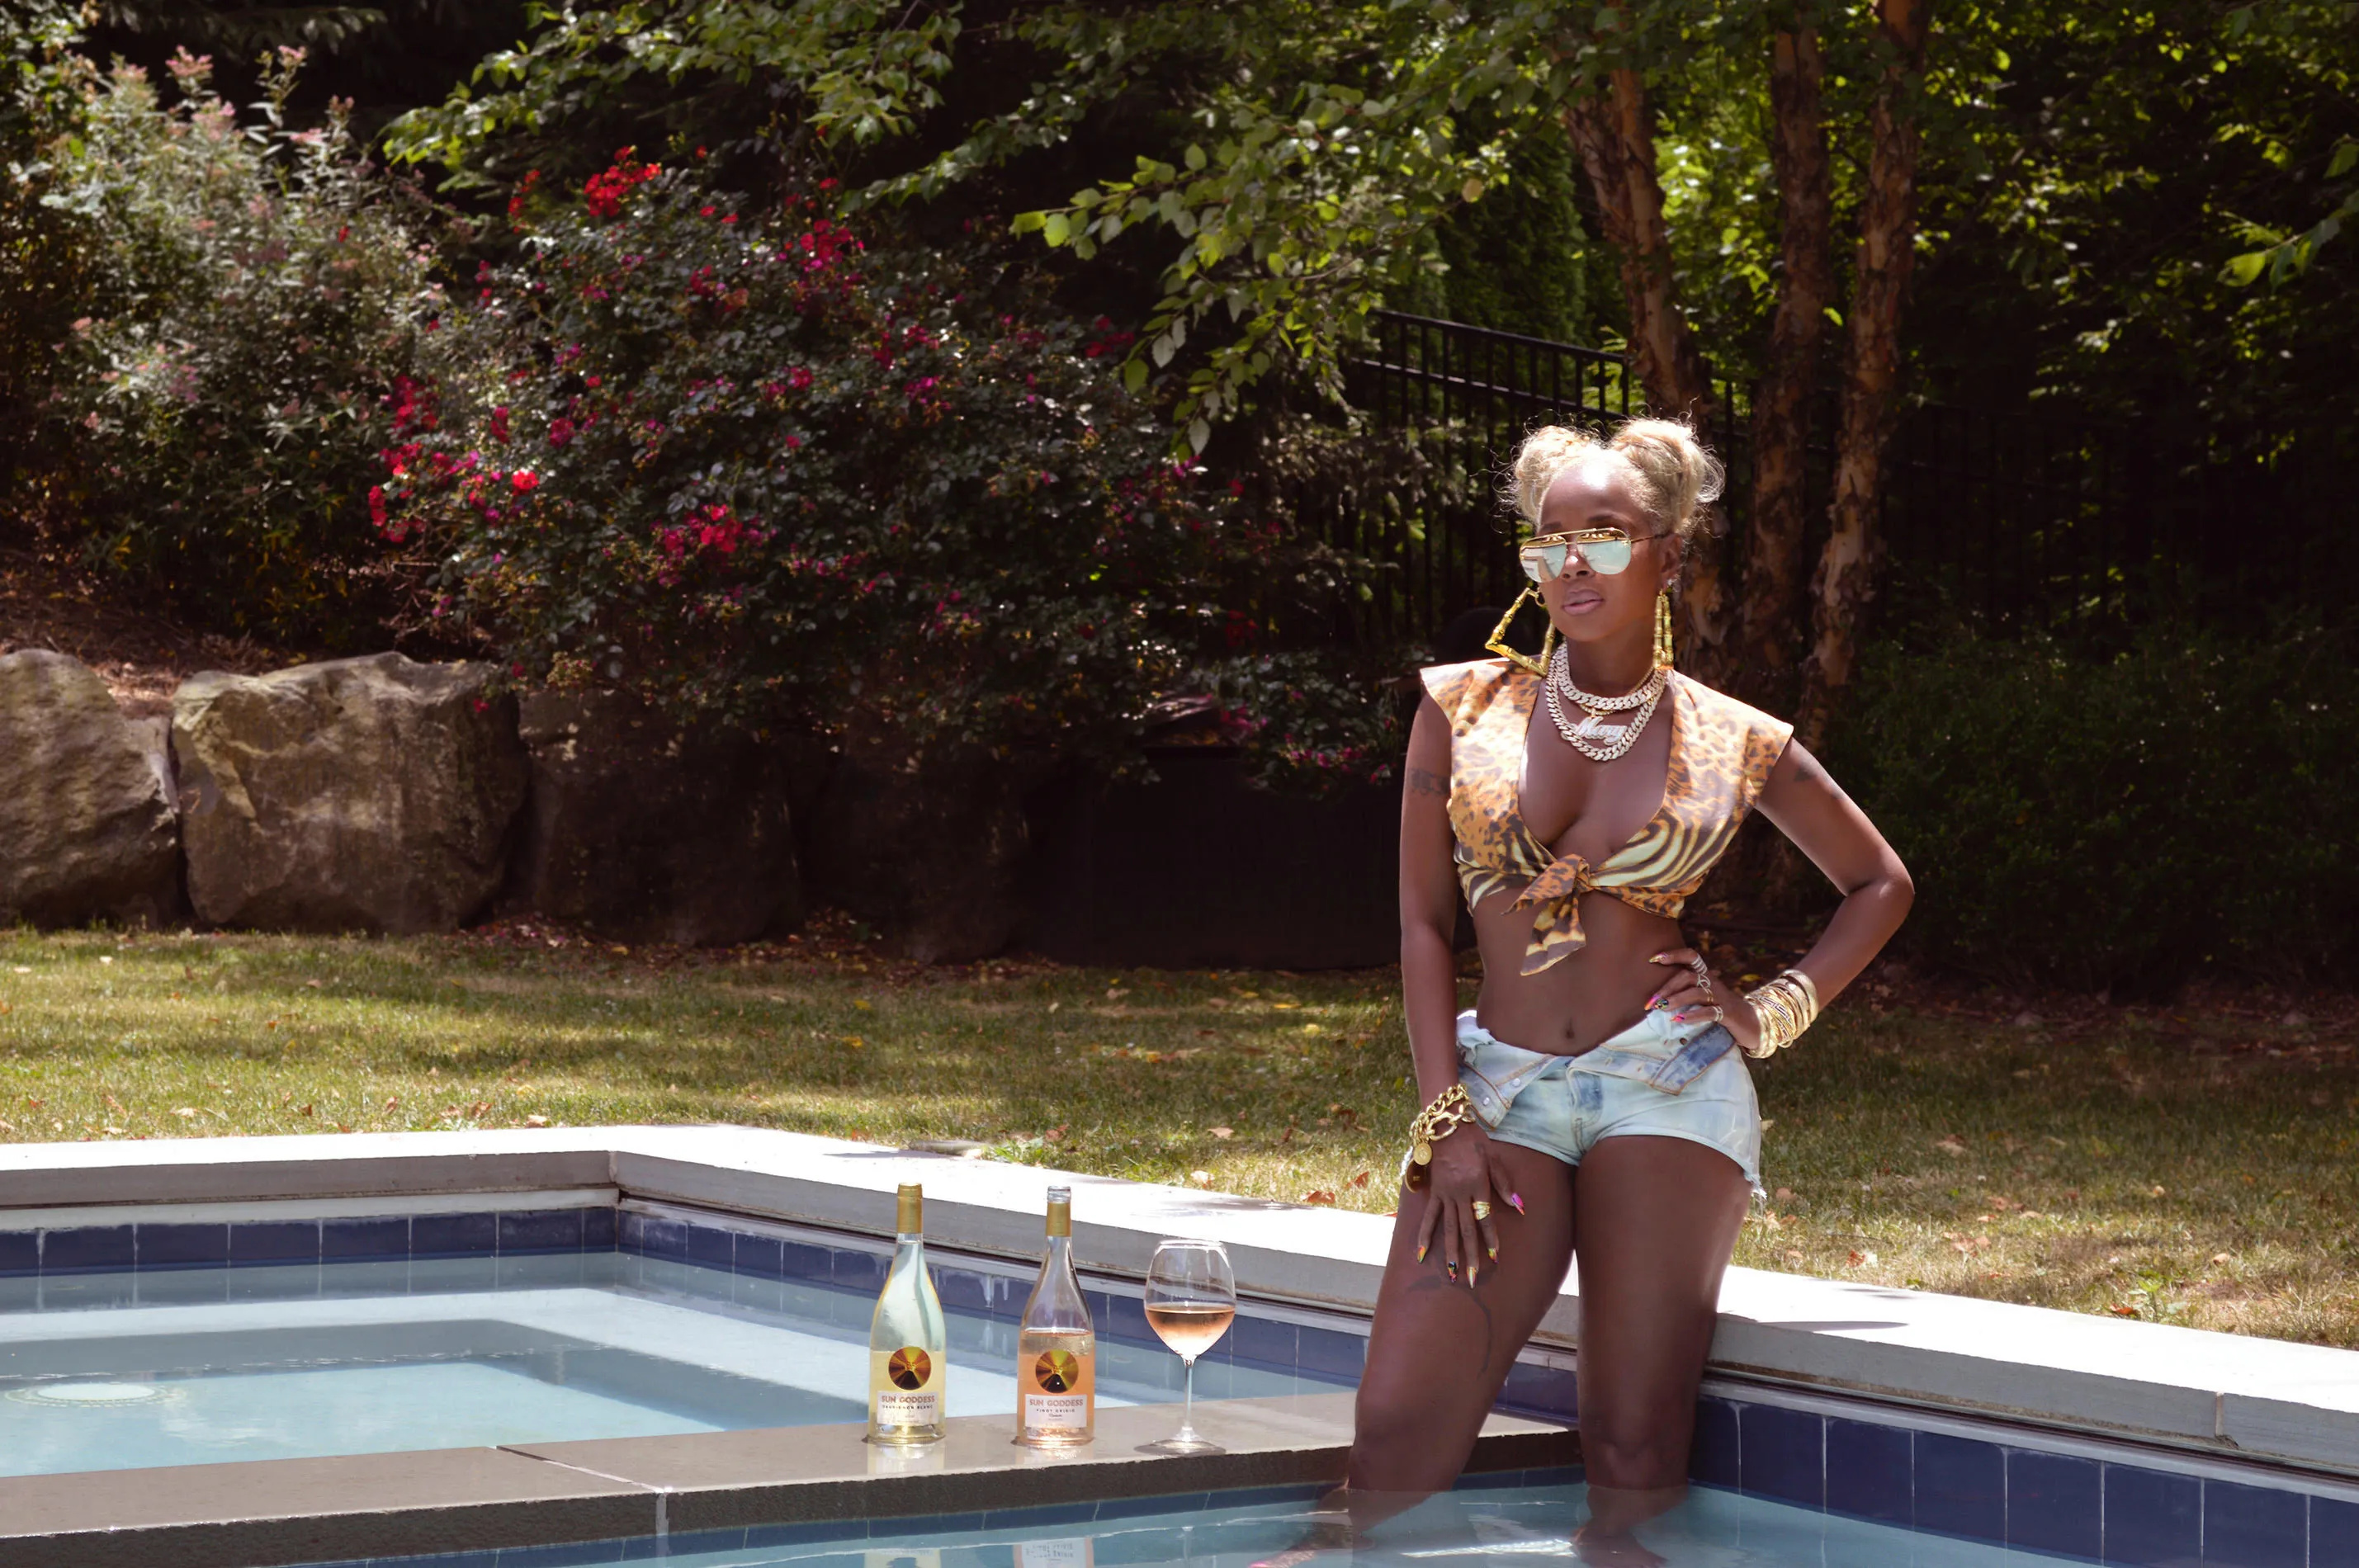 Mary J. Blige: An American singer, songwriter, and actress. 2860x1900 HD Wallpaper.